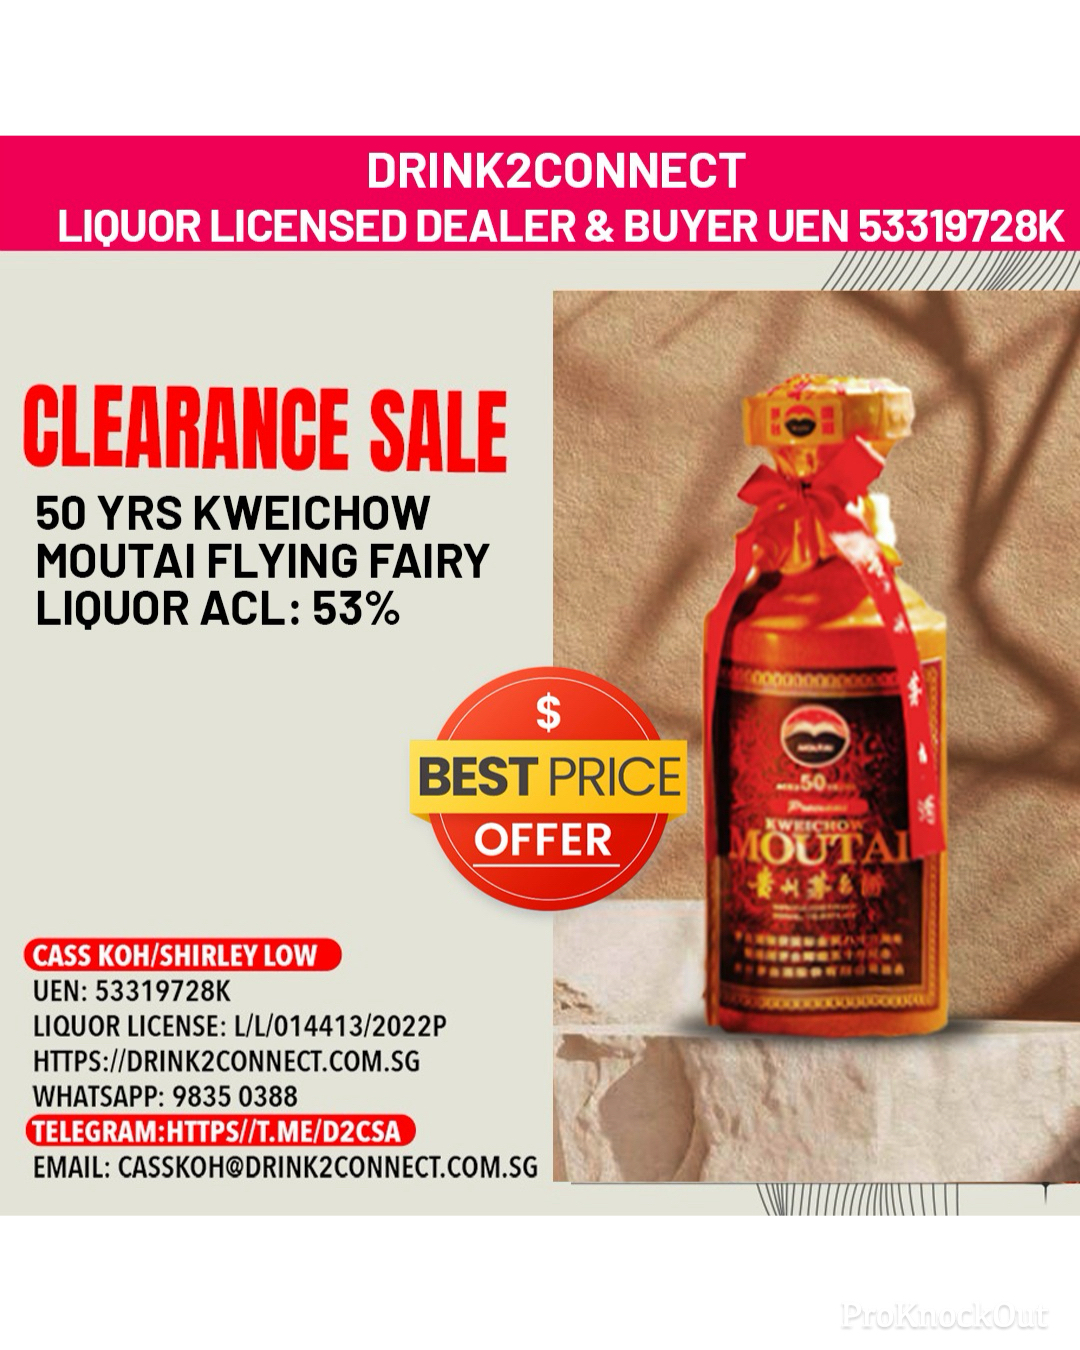 50yrs Kweichow Moutai Flying Fairy Liquor Acl: 53%, Kweichow Moutai Sale Online, Kweichow Flying Fairy Moutai Price Online, Kweichow 50yrs Moutai Sale Online